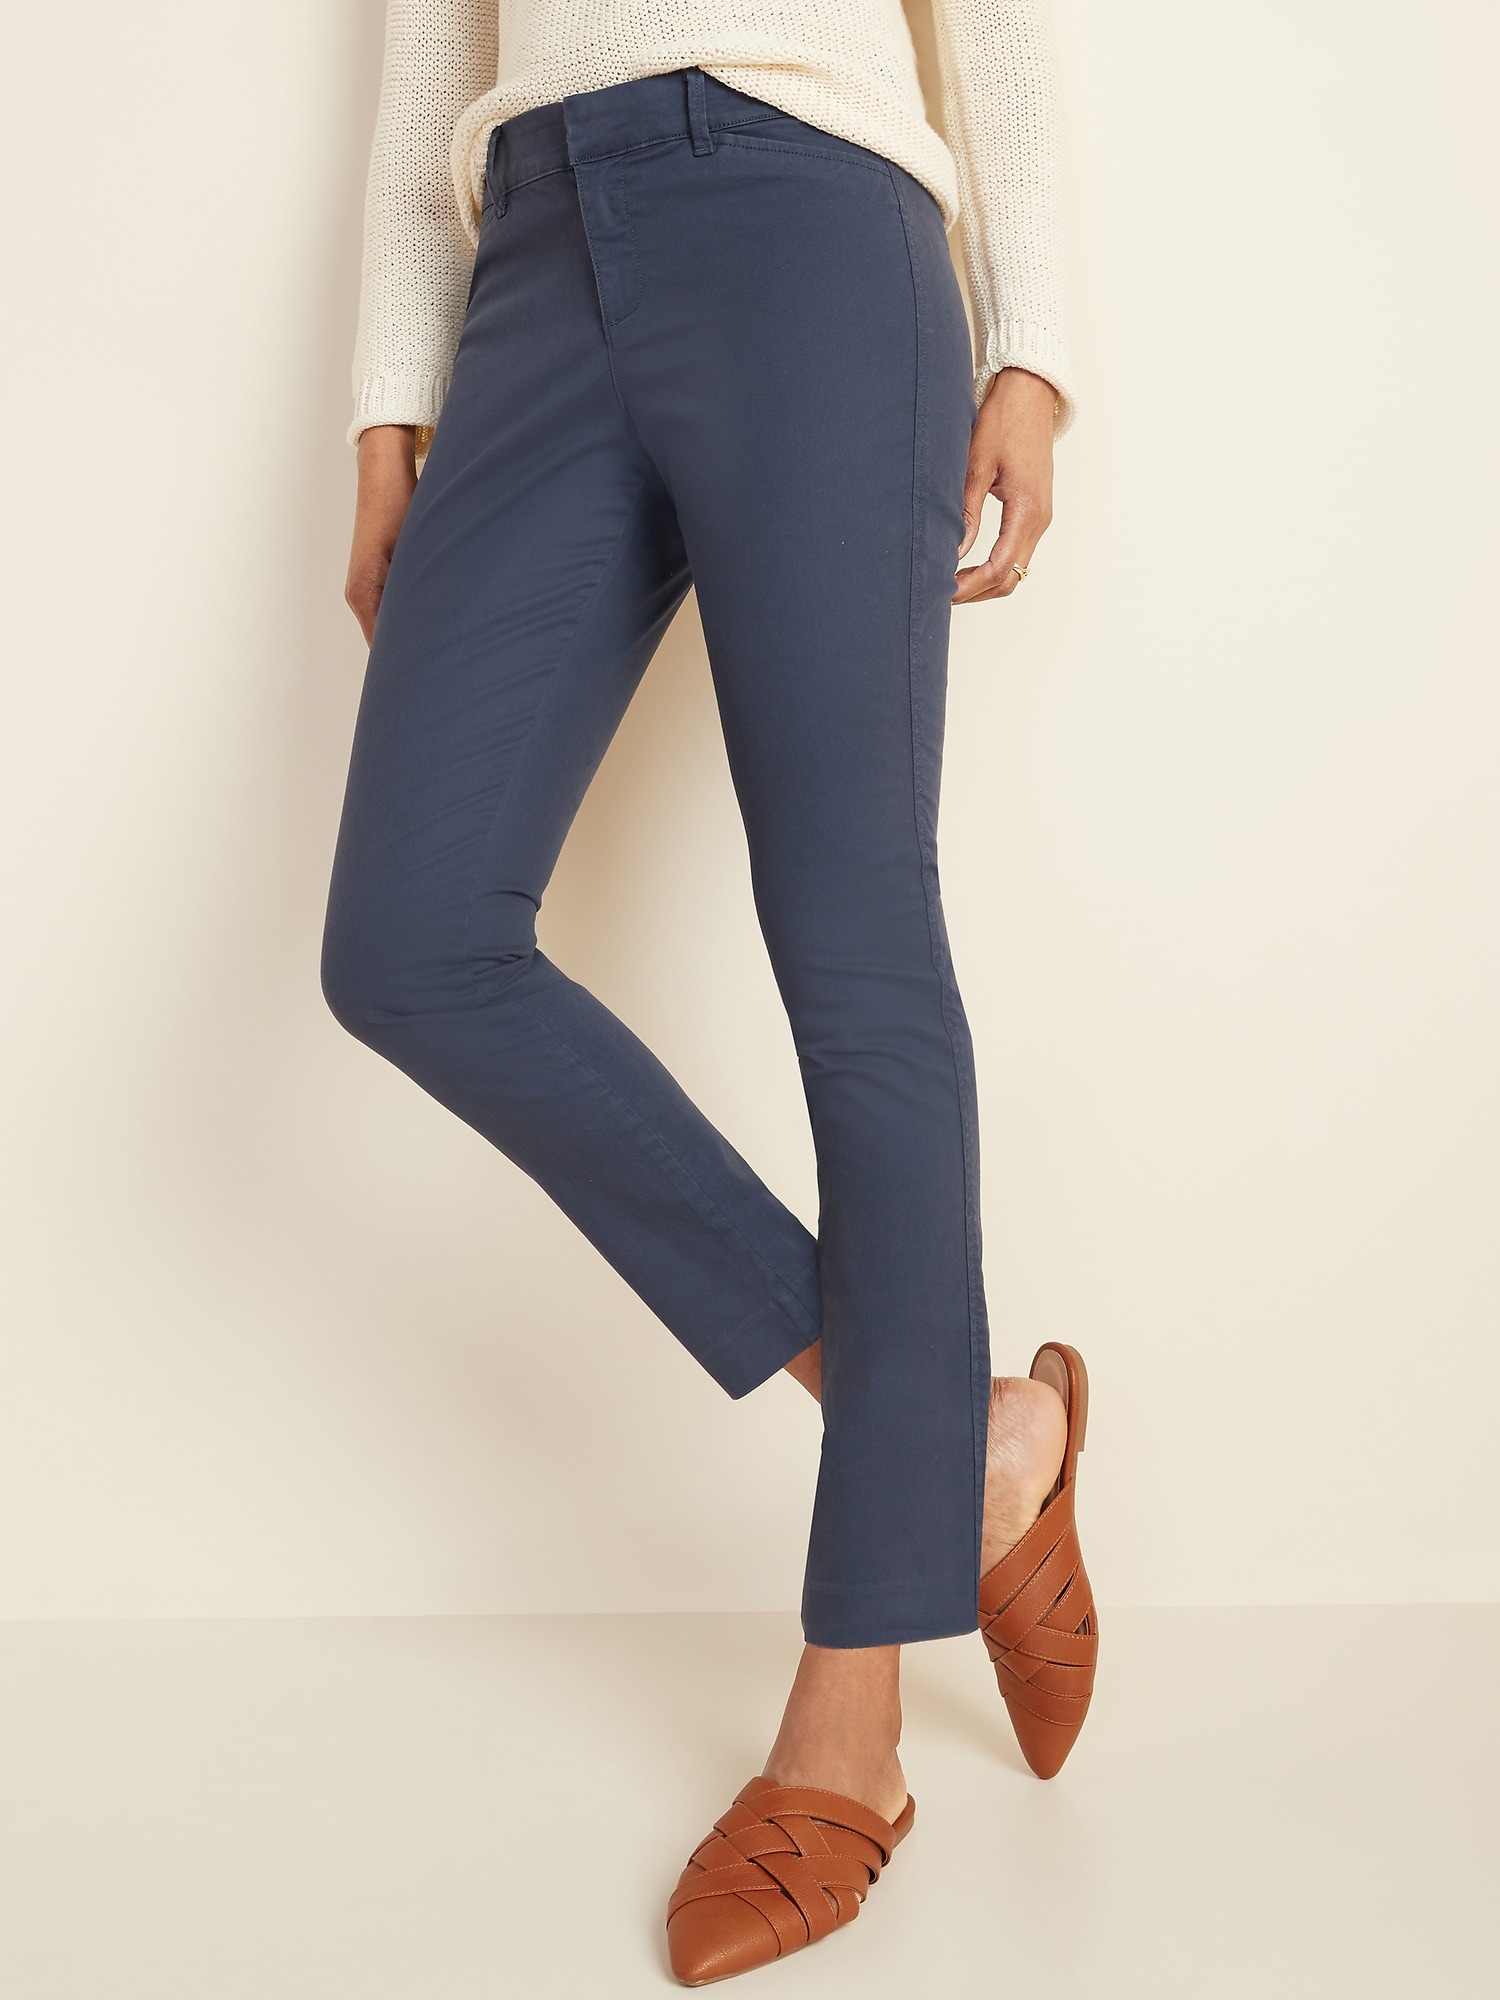 old navy ankle length jeans